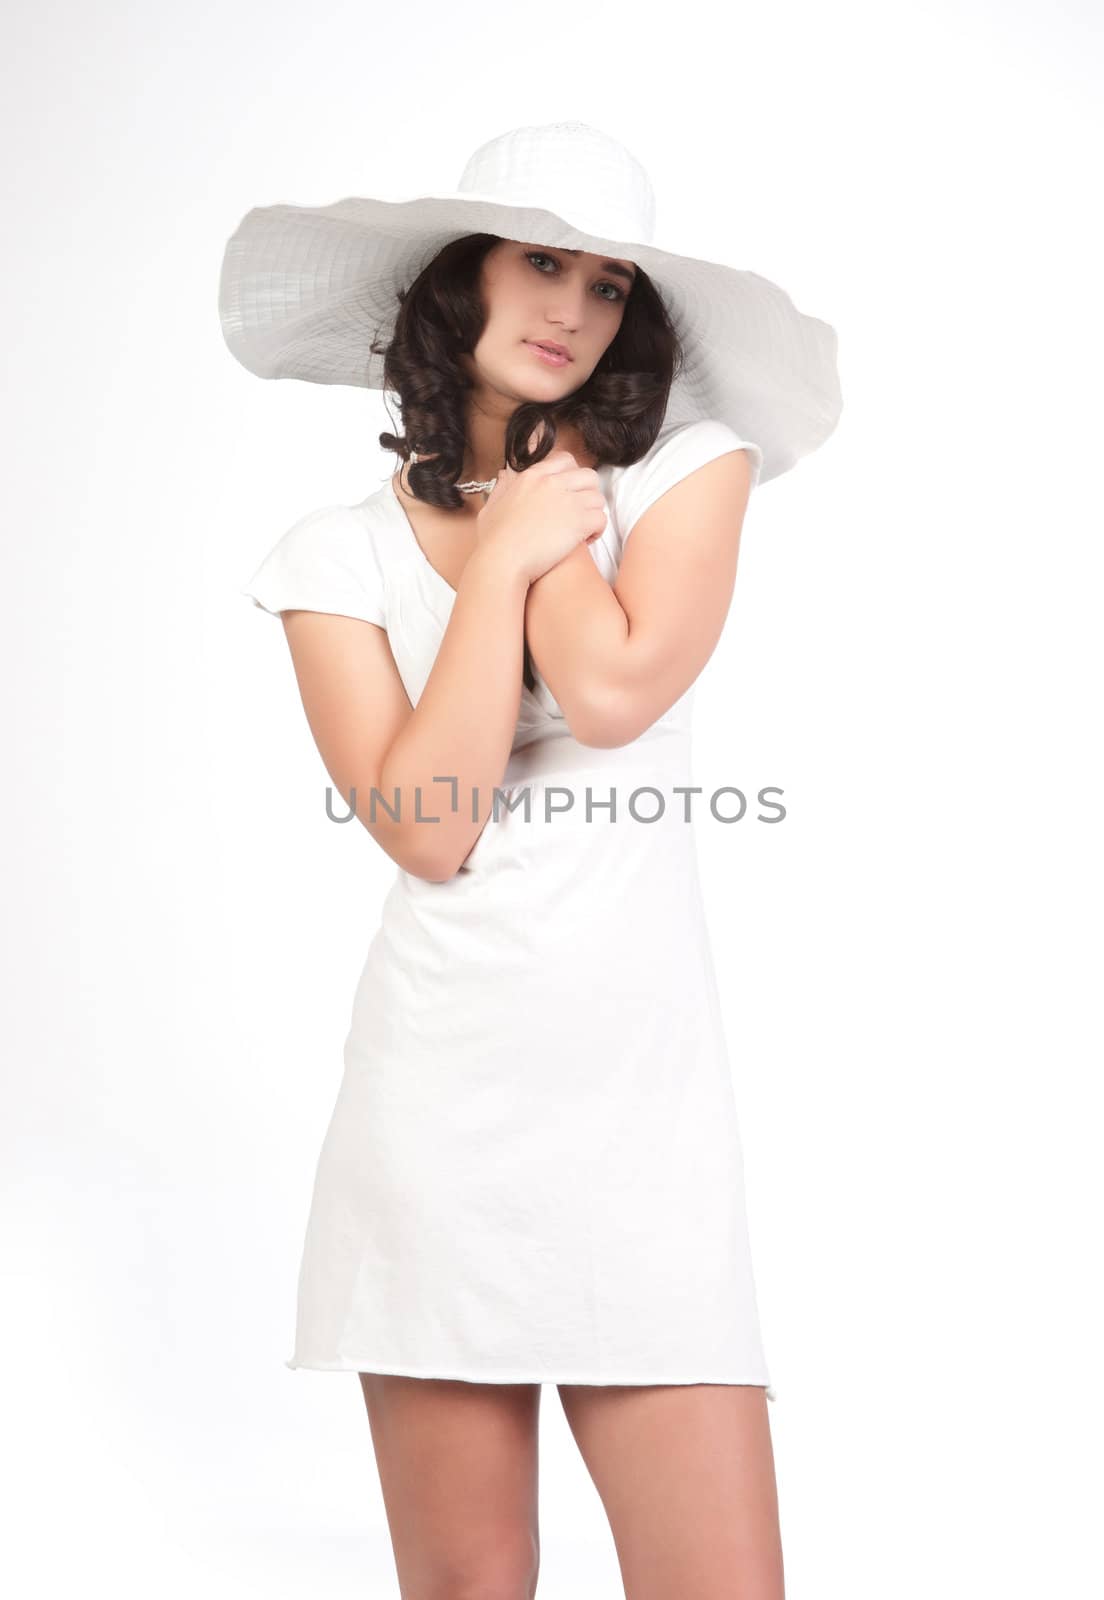 beautiful young fashion woman in white dress and hat